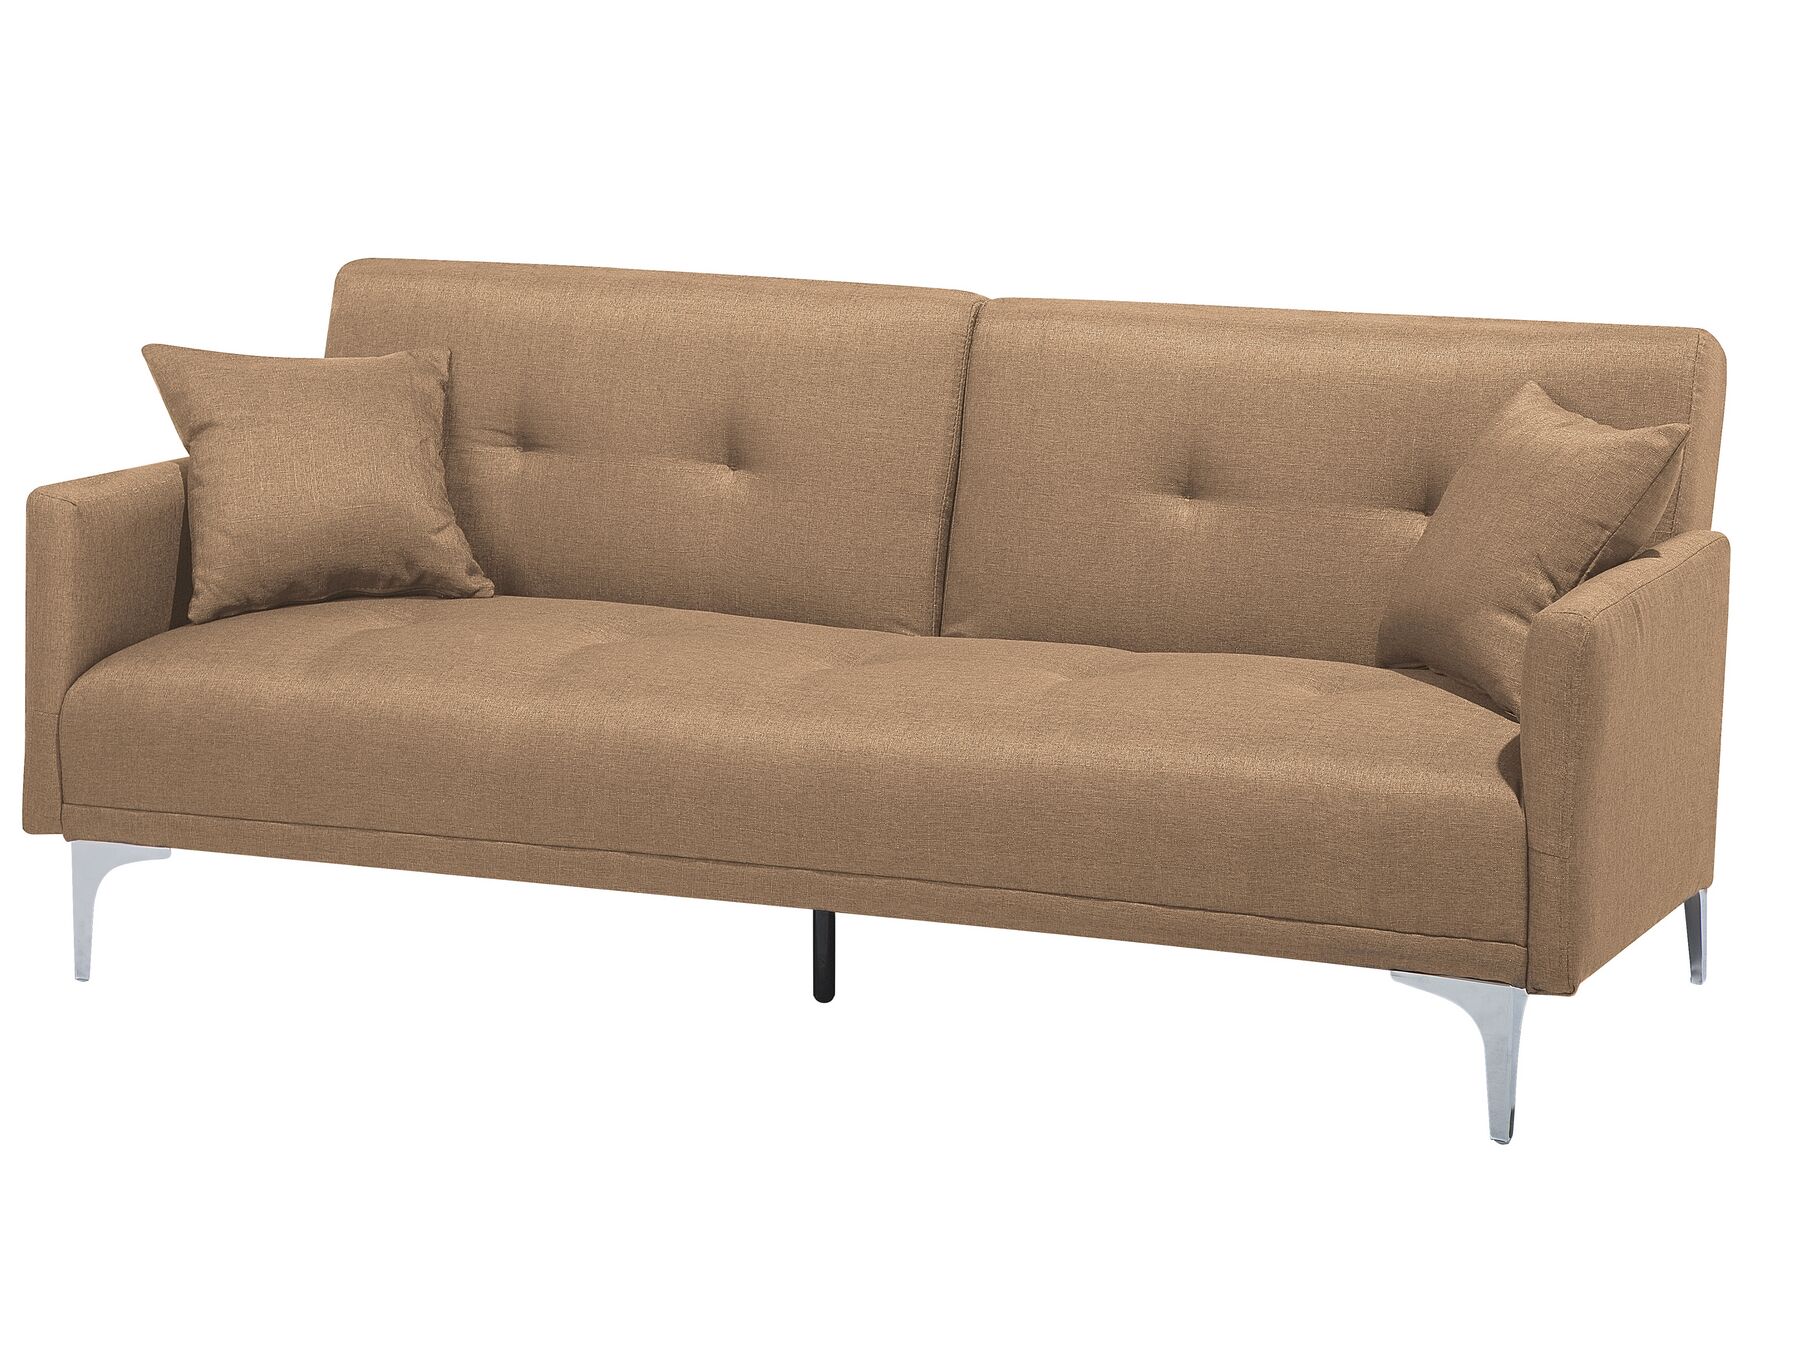 Modern Tufted Fabric Sofa Bed 3 Seater Beige Polyester Chromed Legs Lucan